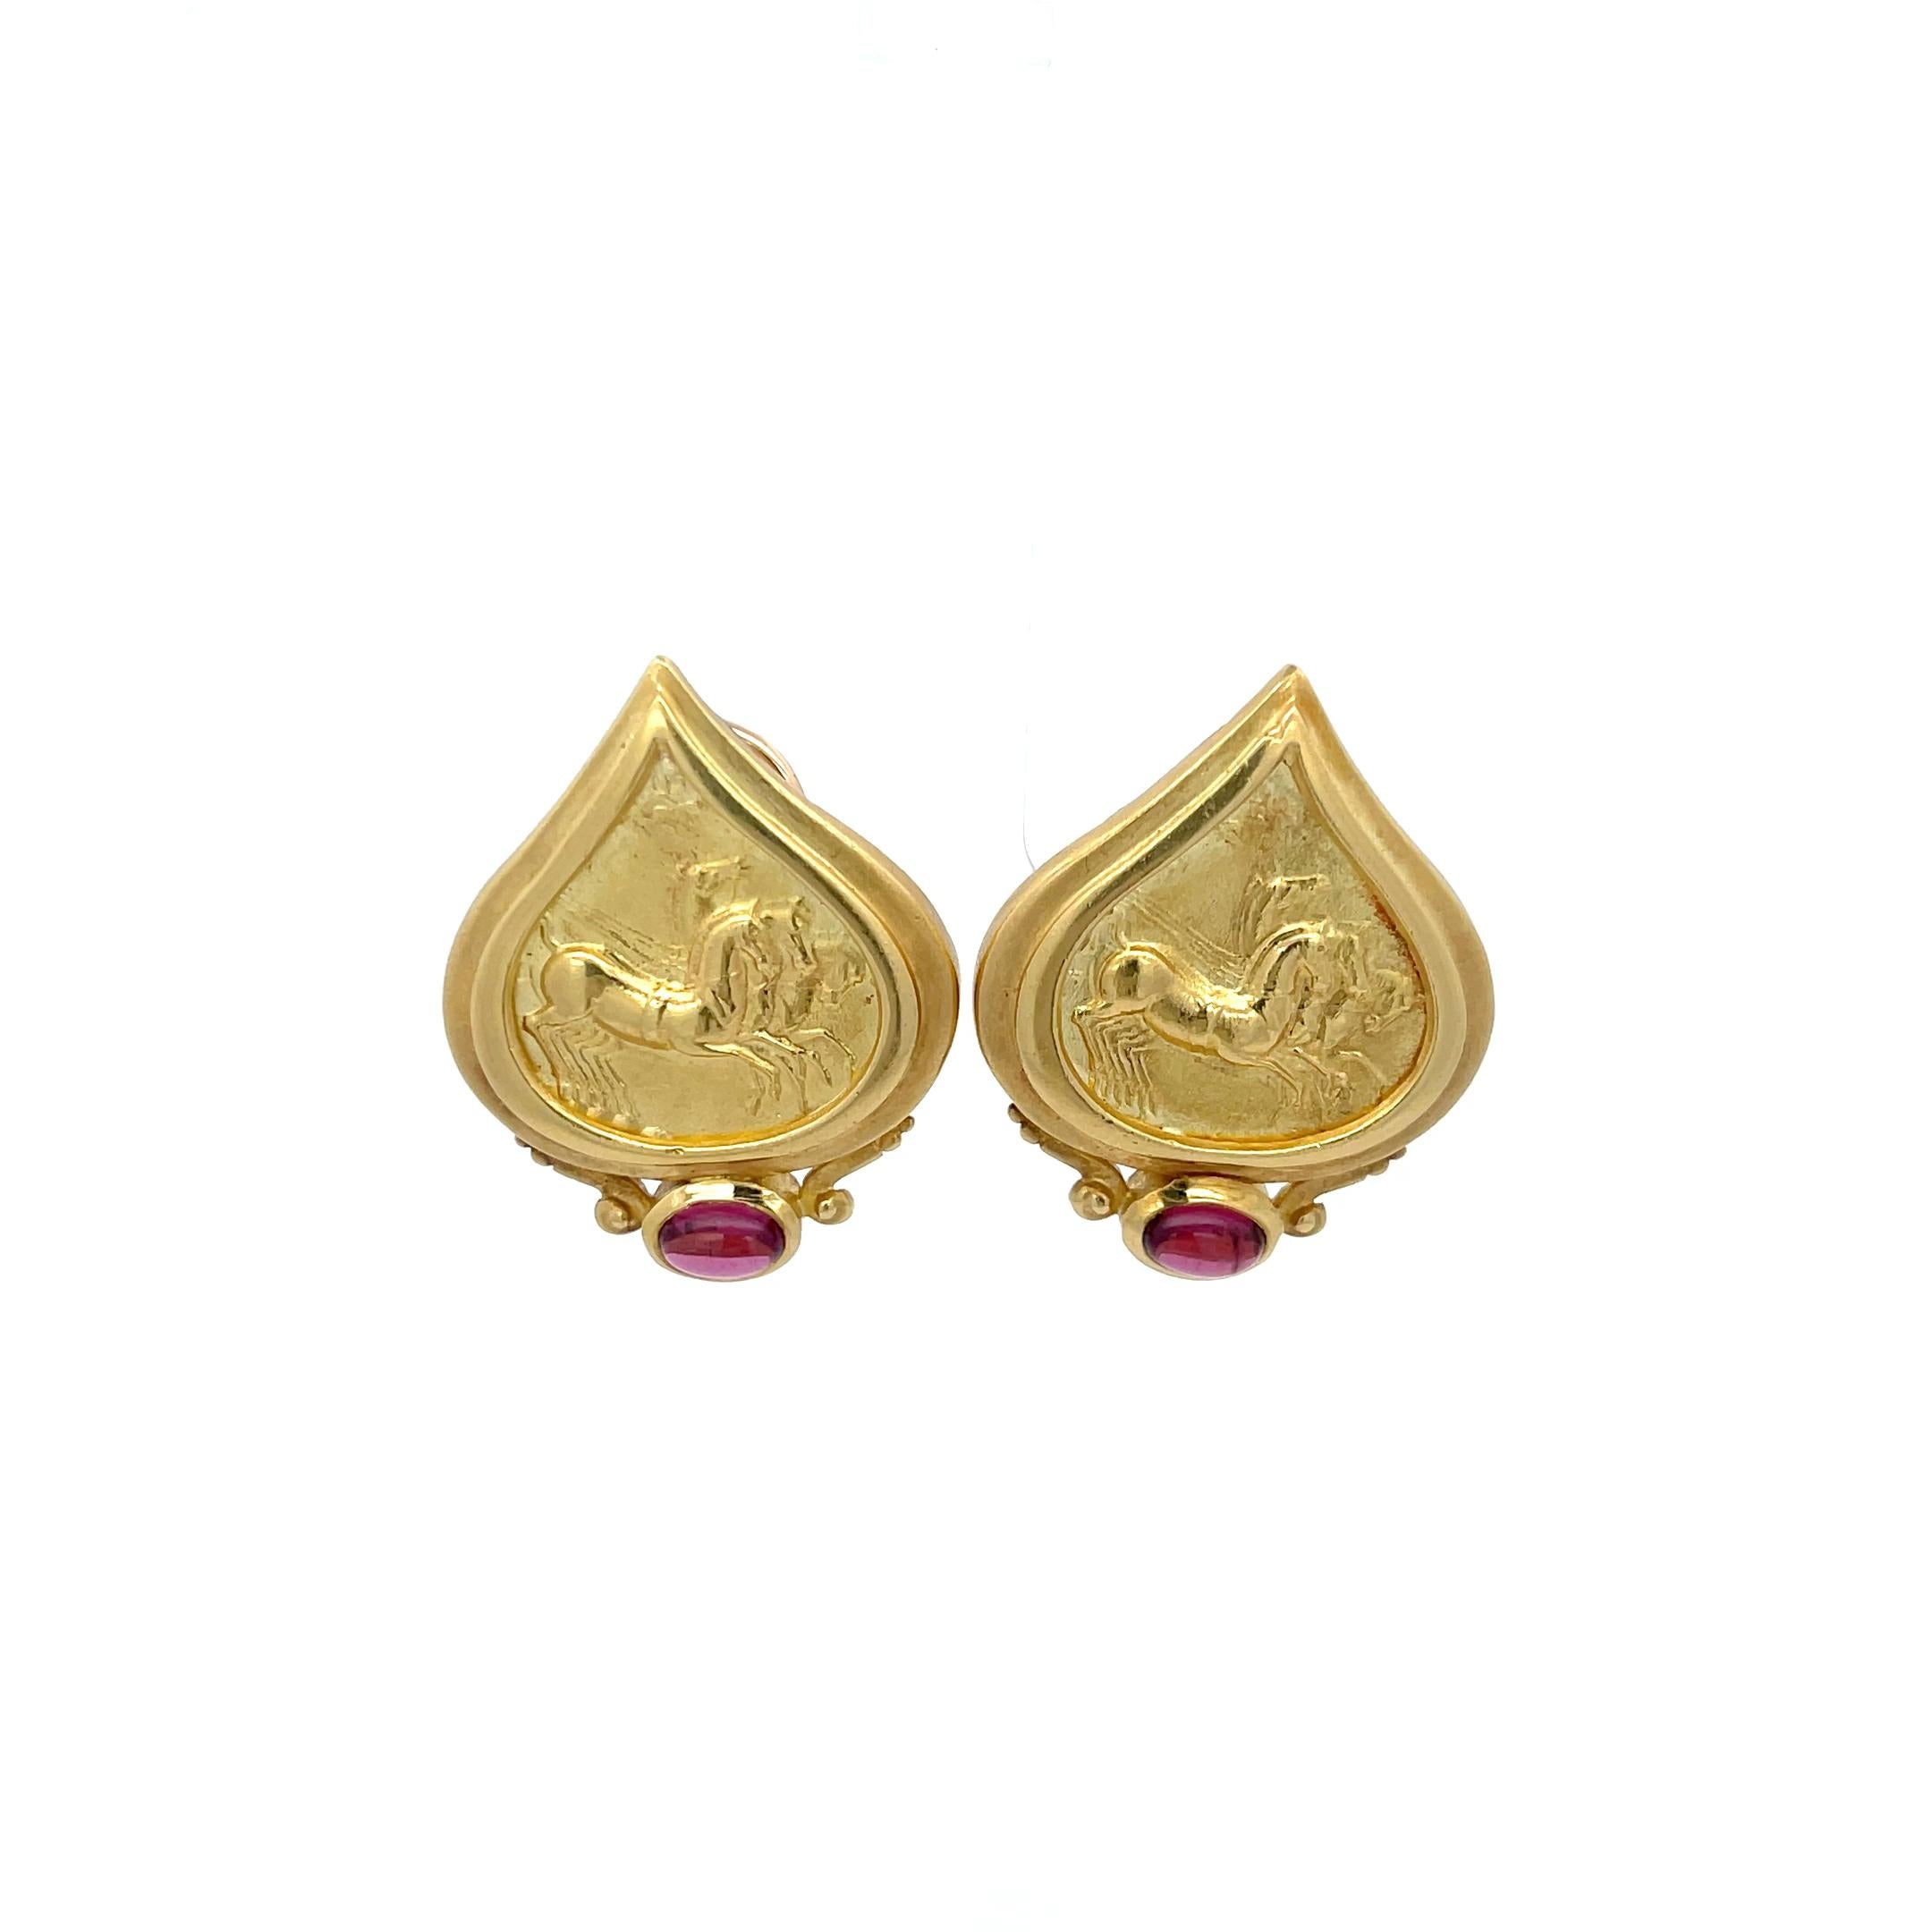 Cabochon Seidengang Horse Scene Pink Tourmaline Earrings 18K Yellow Gold For Sale